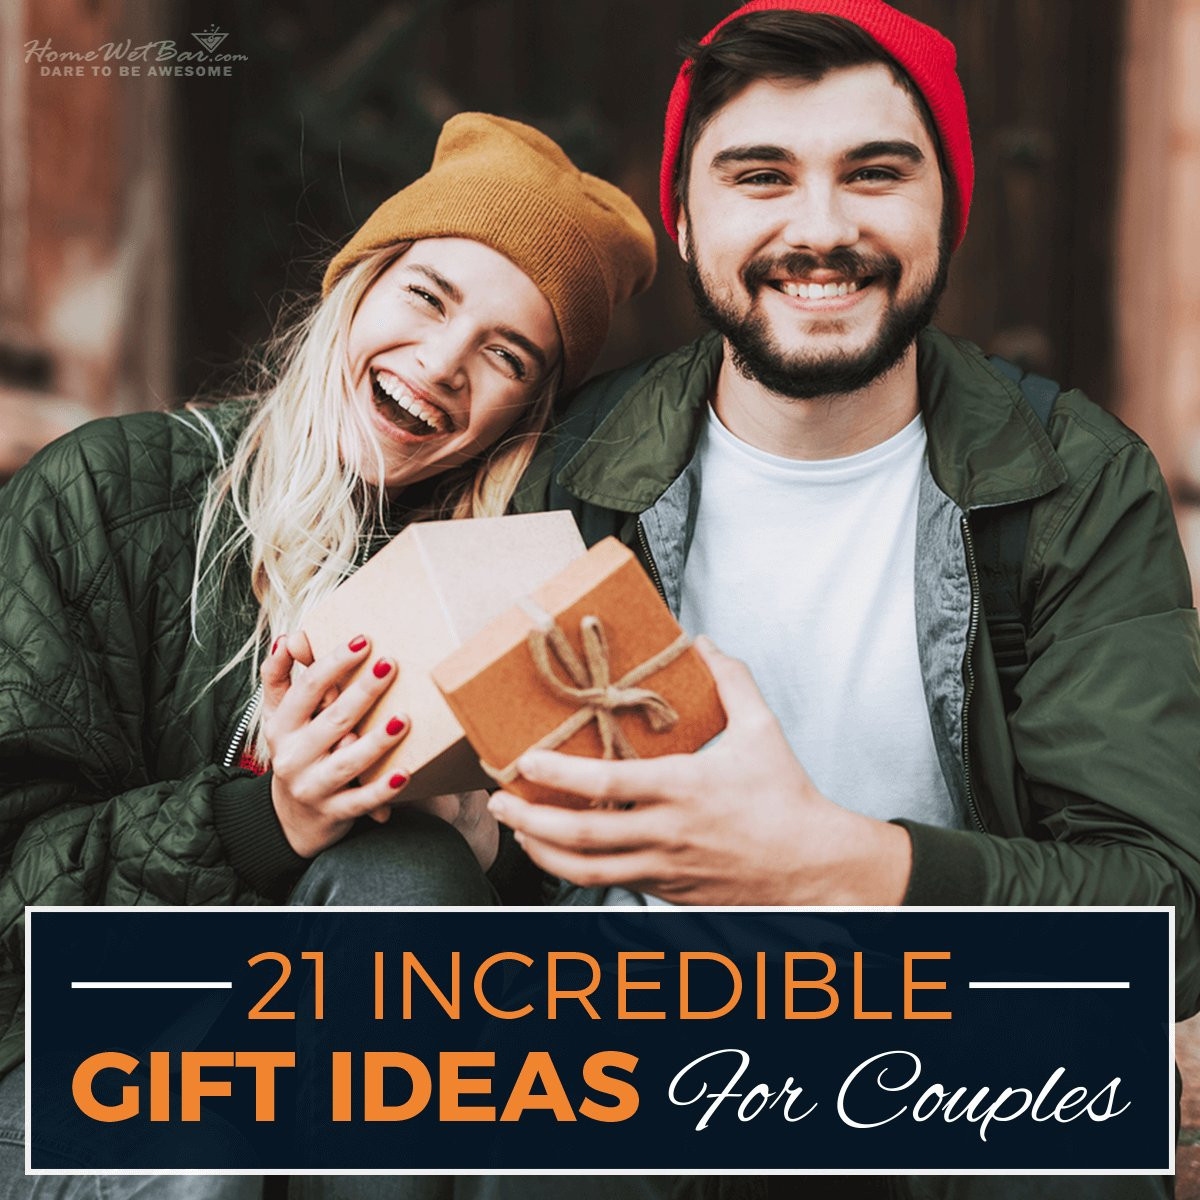 Gift Ideas For Couple
 21 Incredible Gift Ideas for Couples